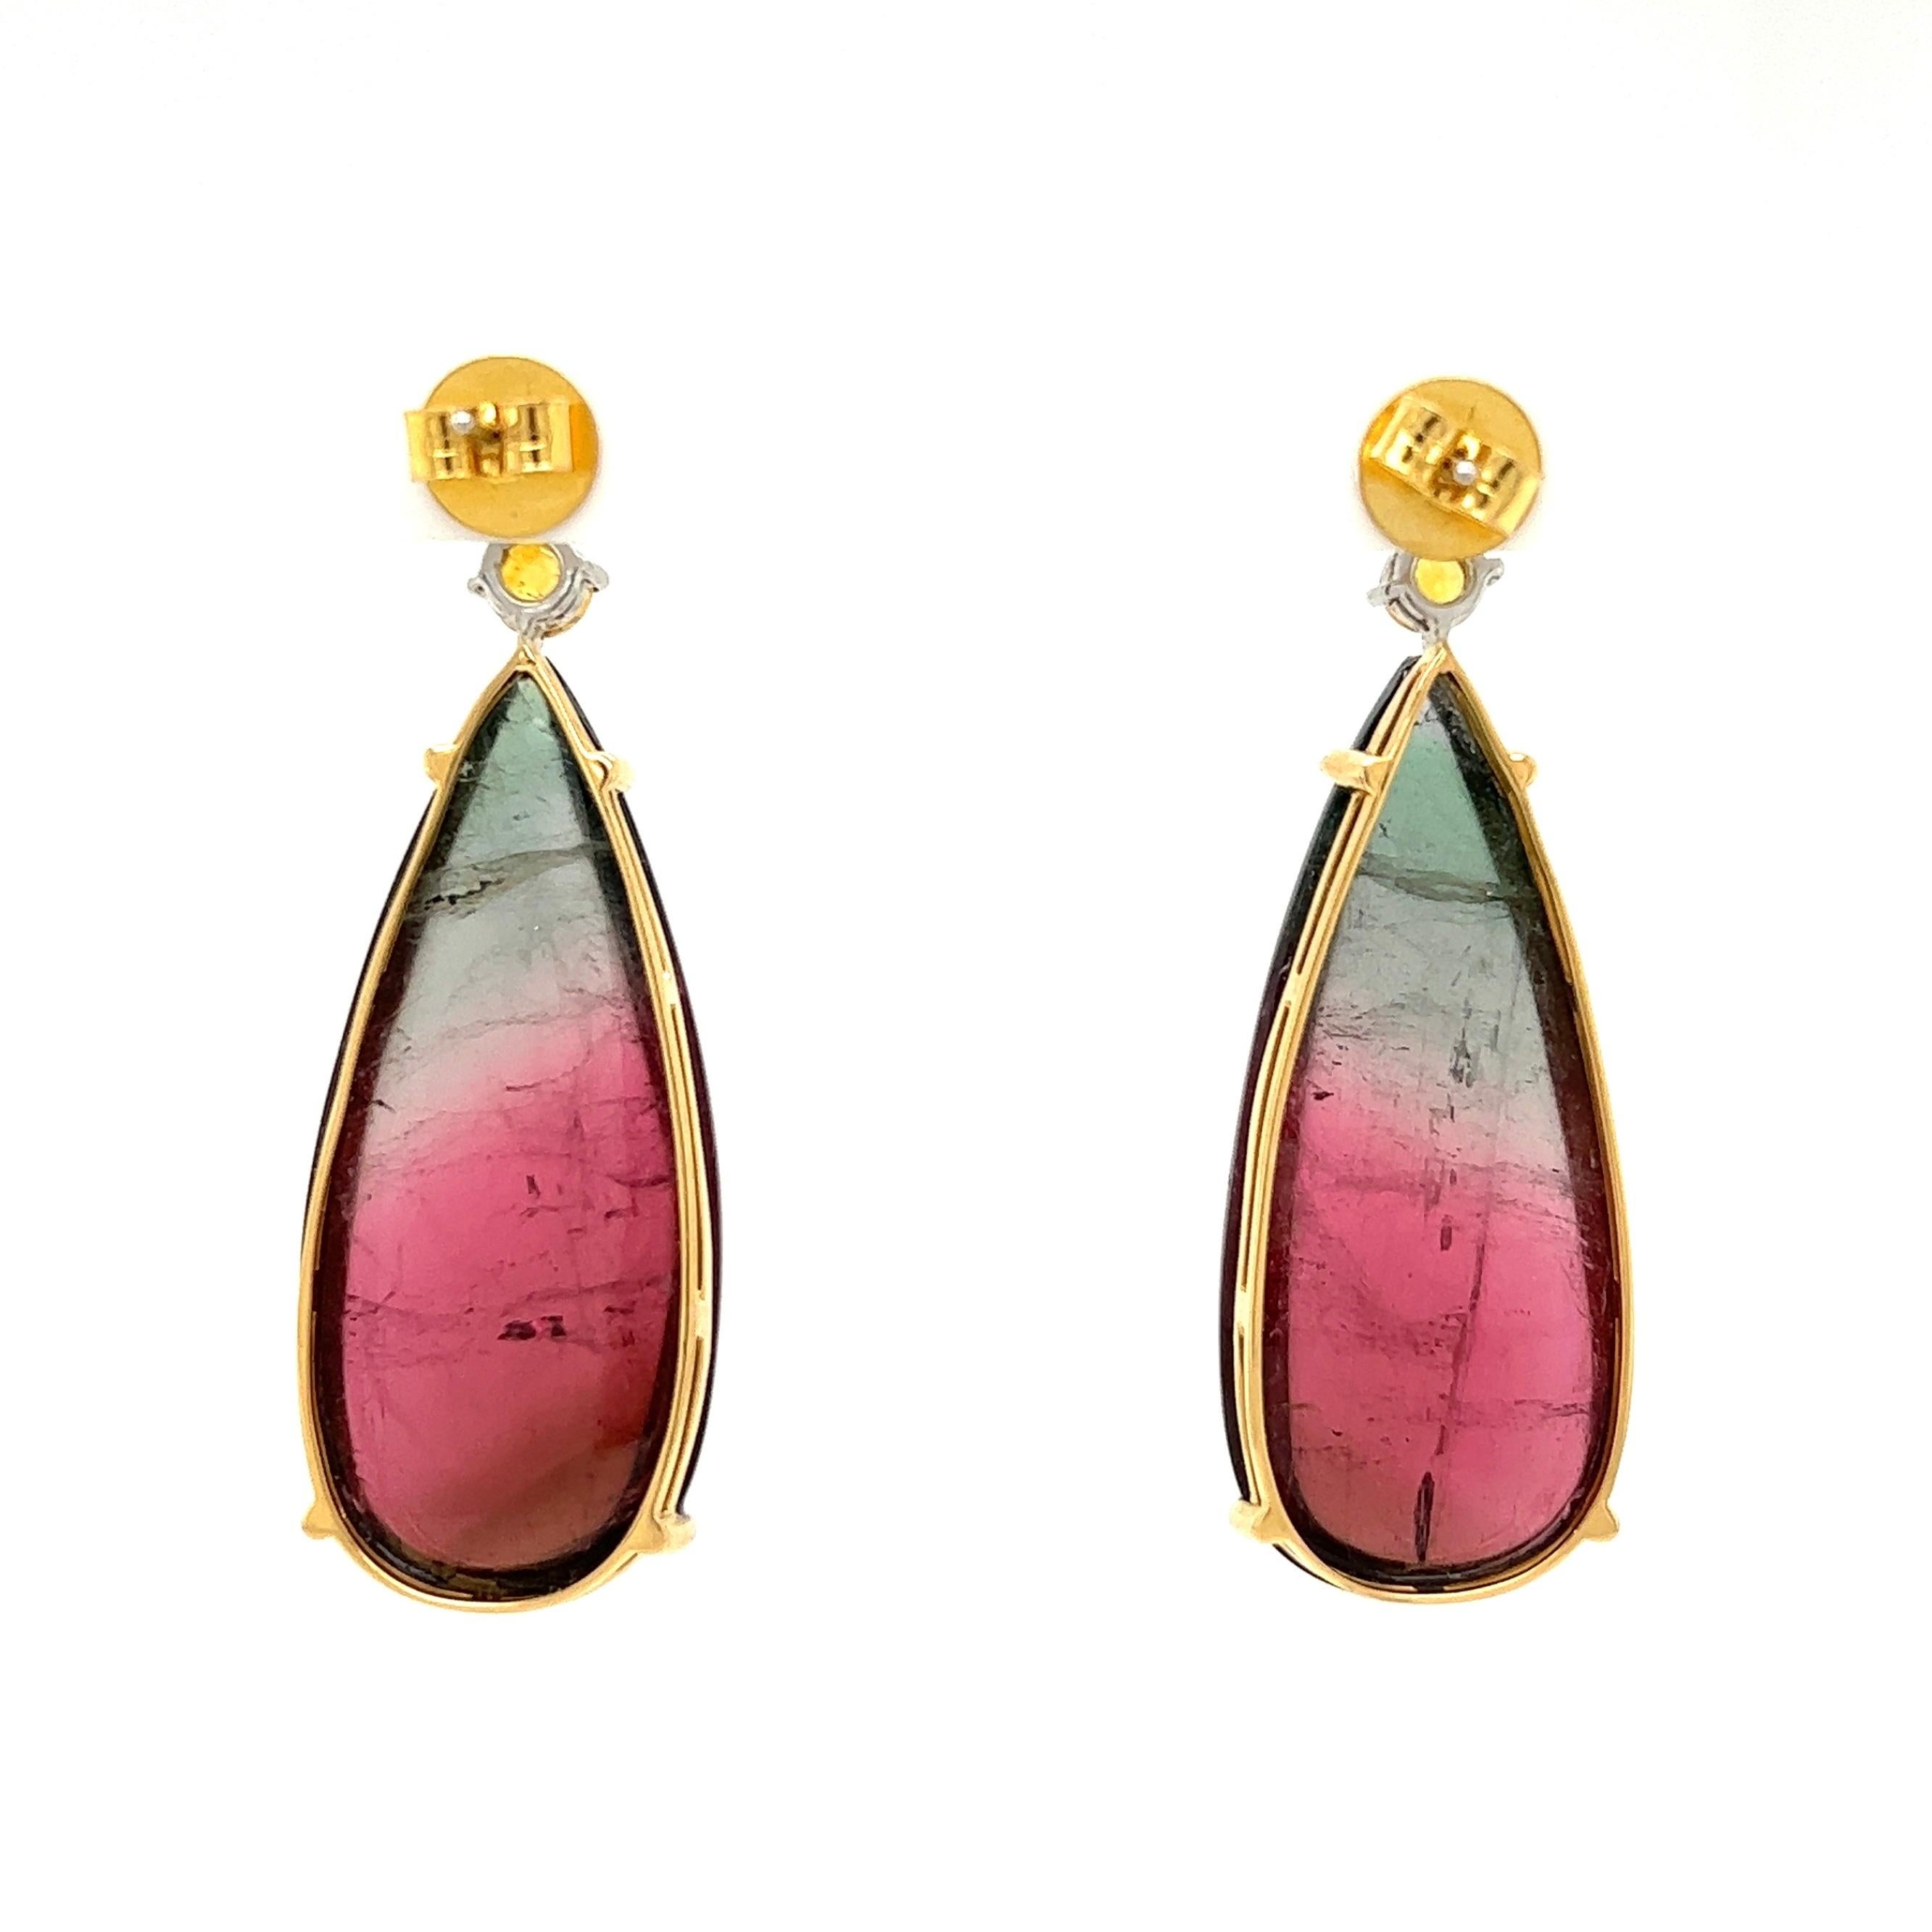 Bi-Color Tourmaline and Yellow Sapphire Drop Earrings Estate Fine Jewelry In Excellent Condition For Sale In Montreal, QC